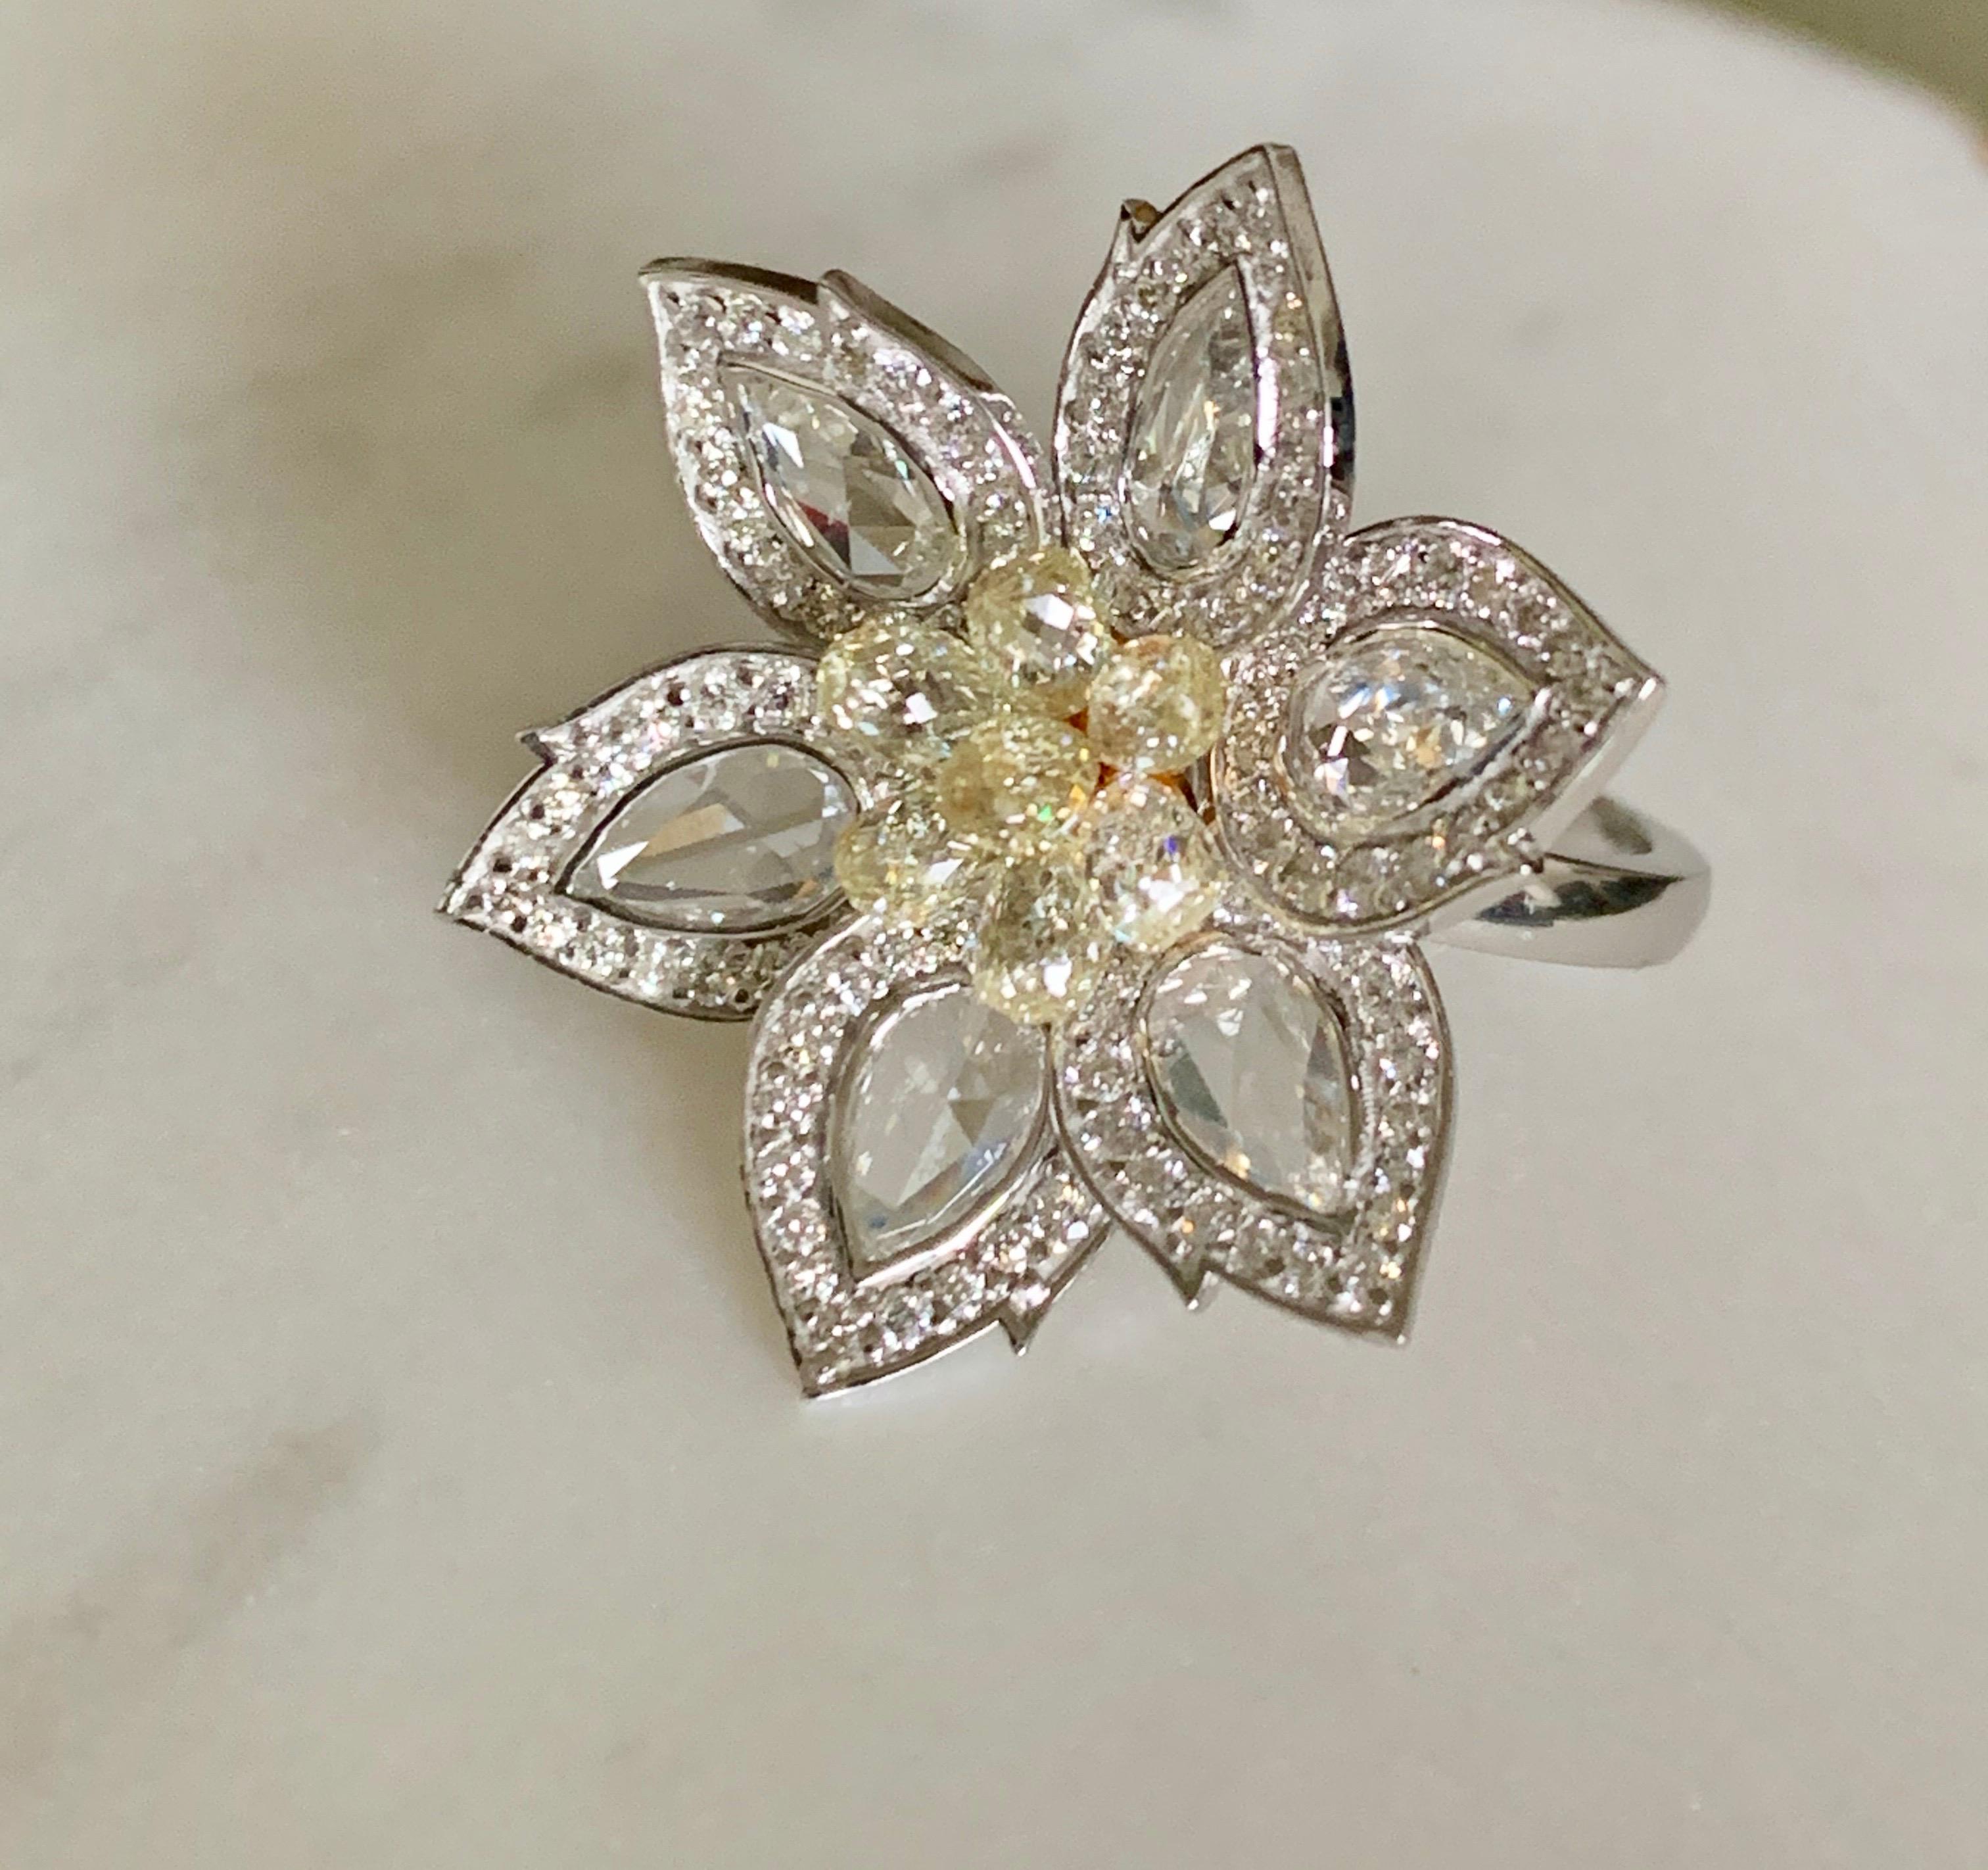 Moguldiam Inc Fresh and contemporary rose cut diamond and briolette diamond flower ring is beautifully handcrafted in 18K white gold. 
The details are as follows : 
Total Diamond Weight : 4.01 carat ( GH color and VS clarity ) 
Briolette diamond